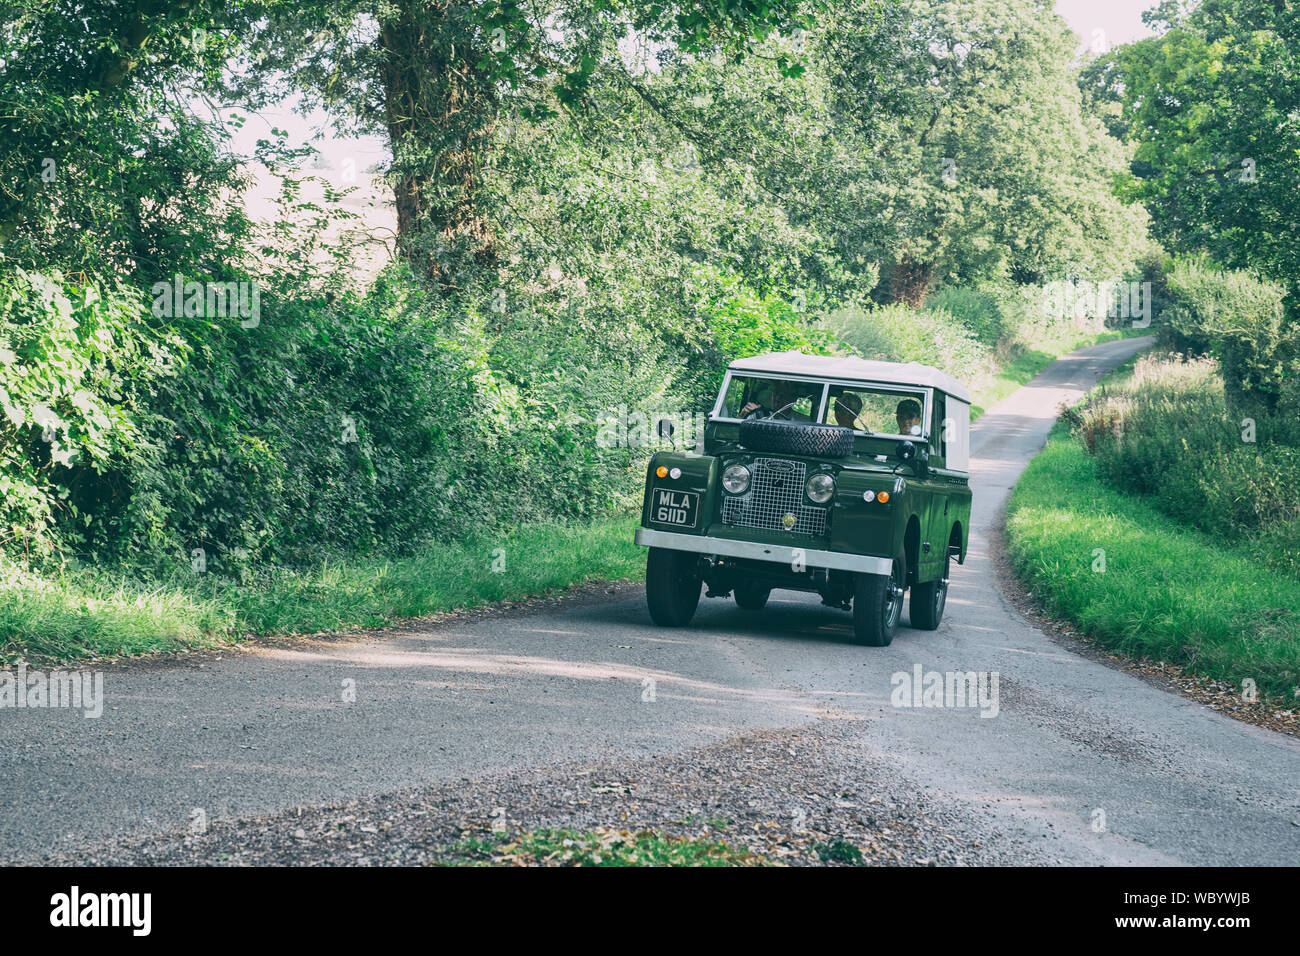 1966 Land Rover Series IIA  going to a classic car show in the Oxfordshire countryside. Broughton, Banbury, England. Vintage filter applied Stock Photo